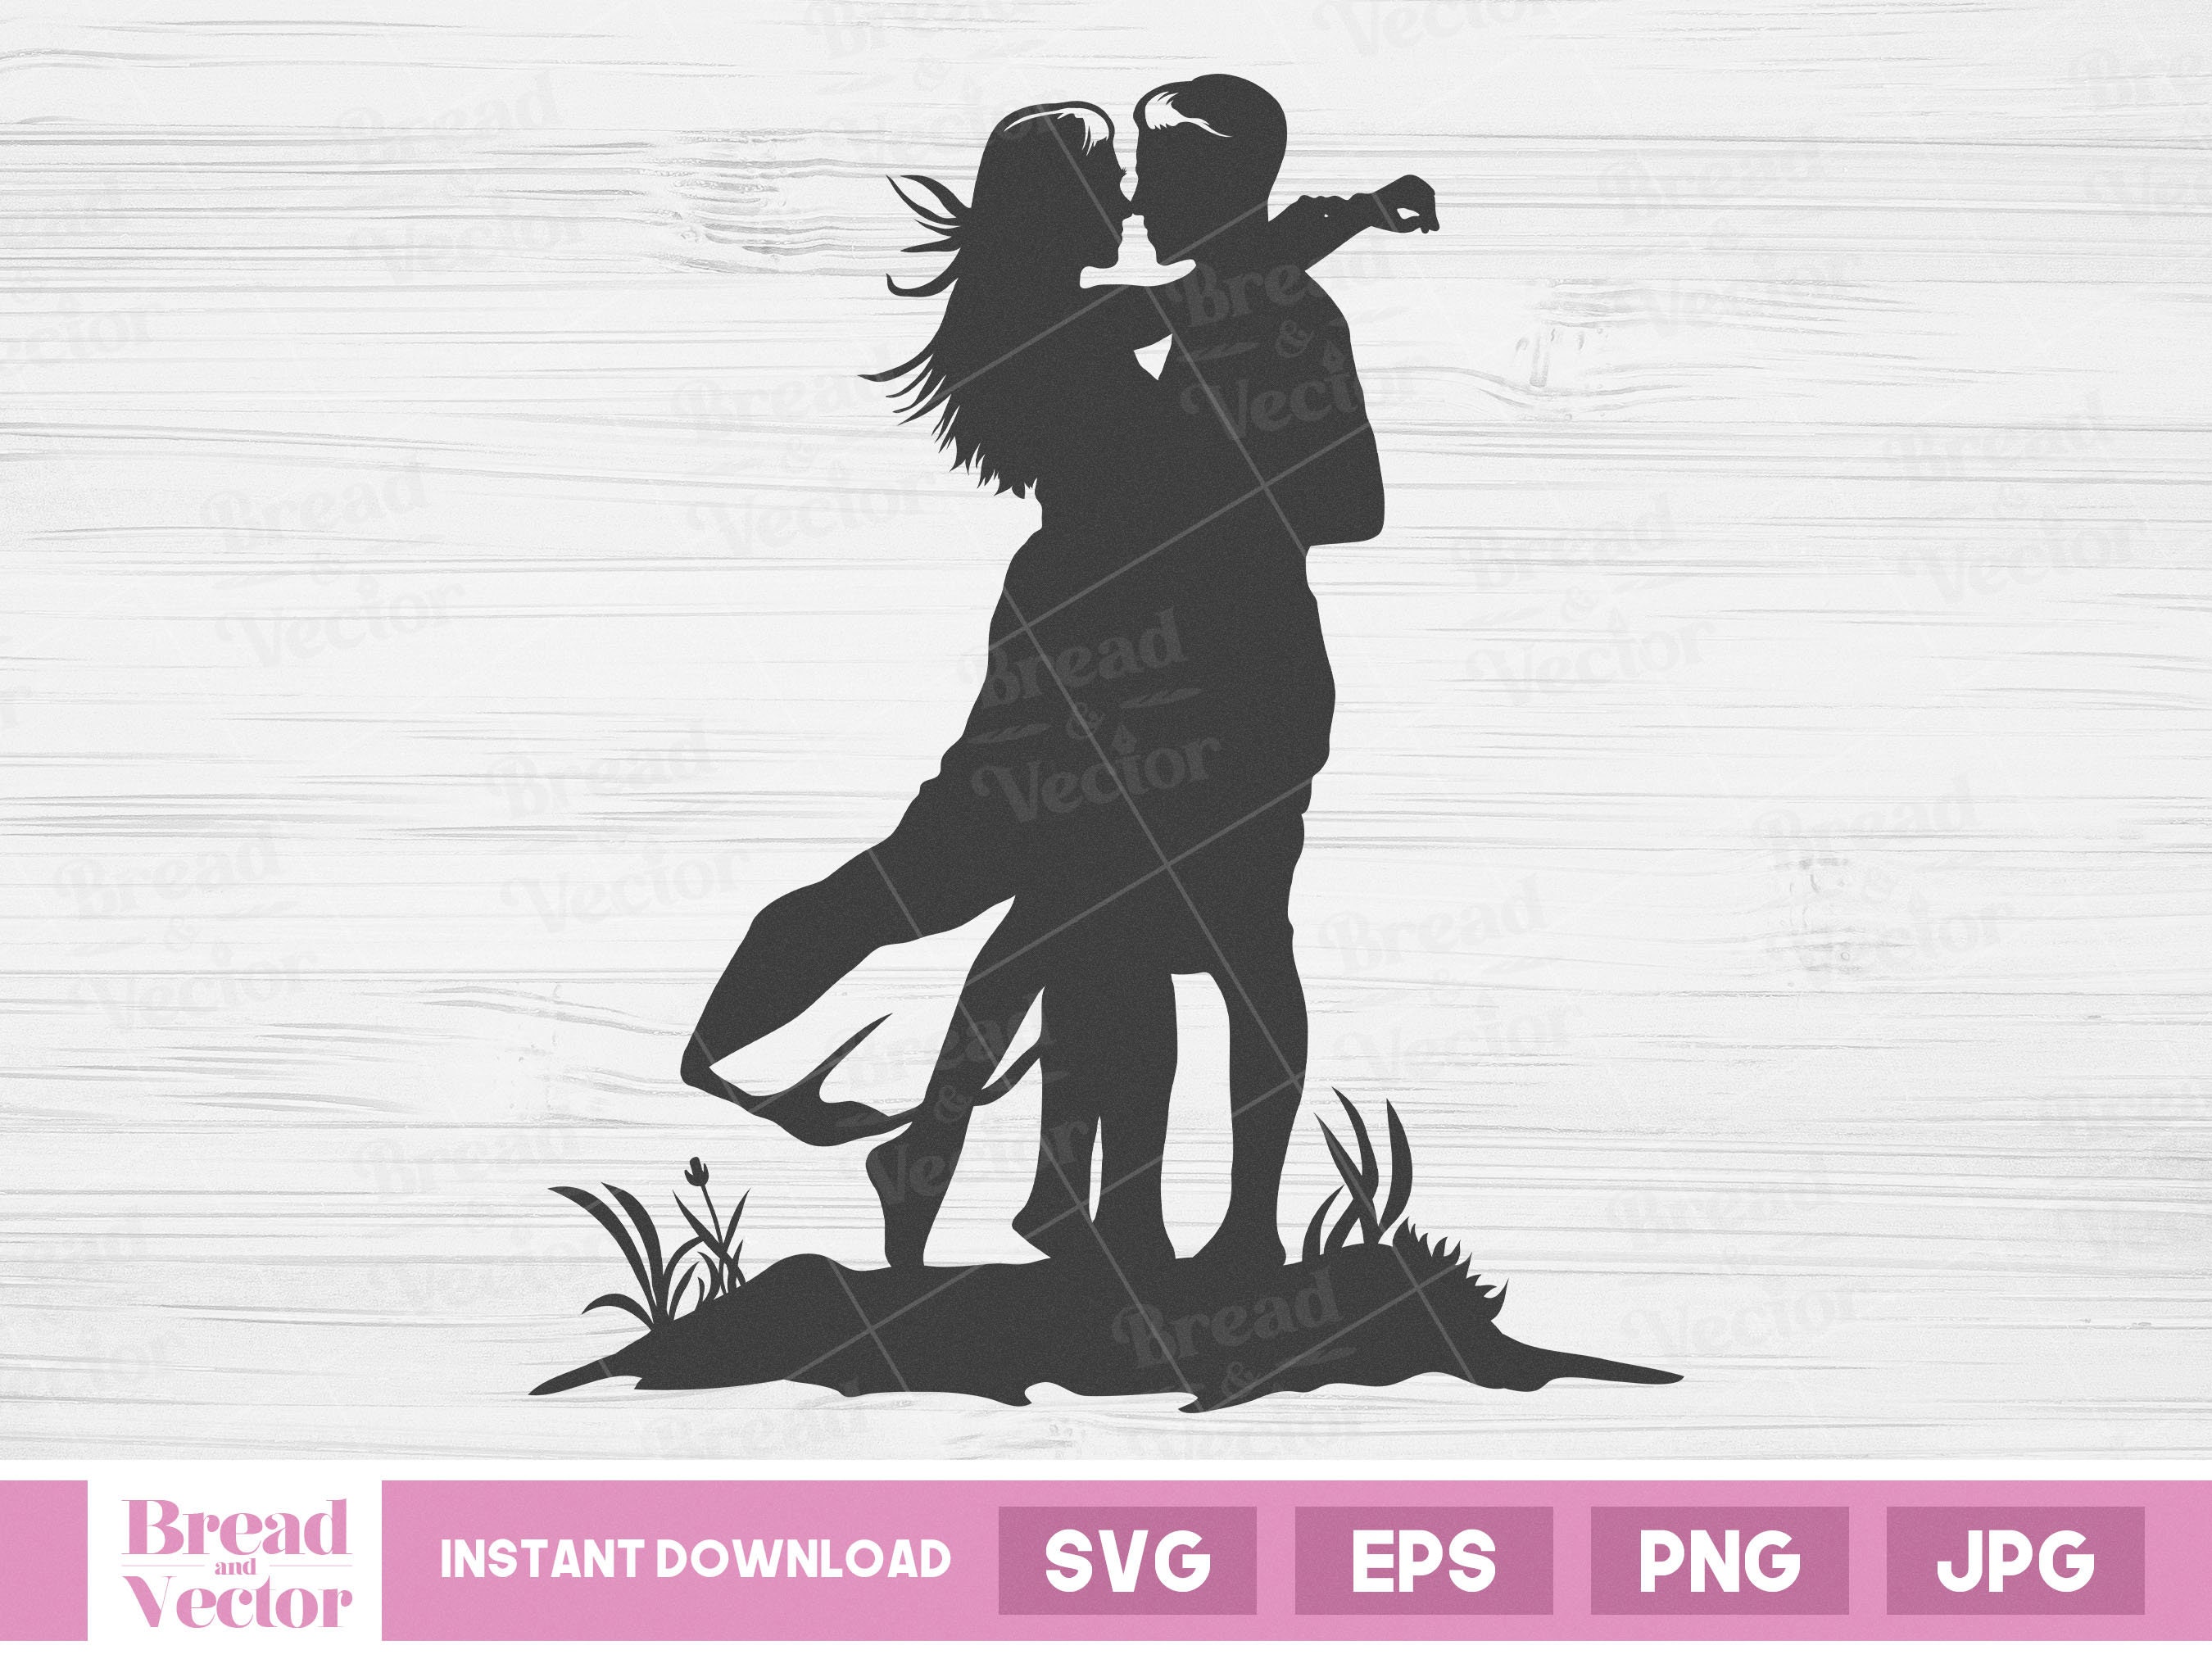 Couple Silhouette Clipart, Couples Silhouettes, Lovers Silhouettes Clip  Art, Cupid Silhouettes, Wedding Silhouettes Clipart -  Denmark